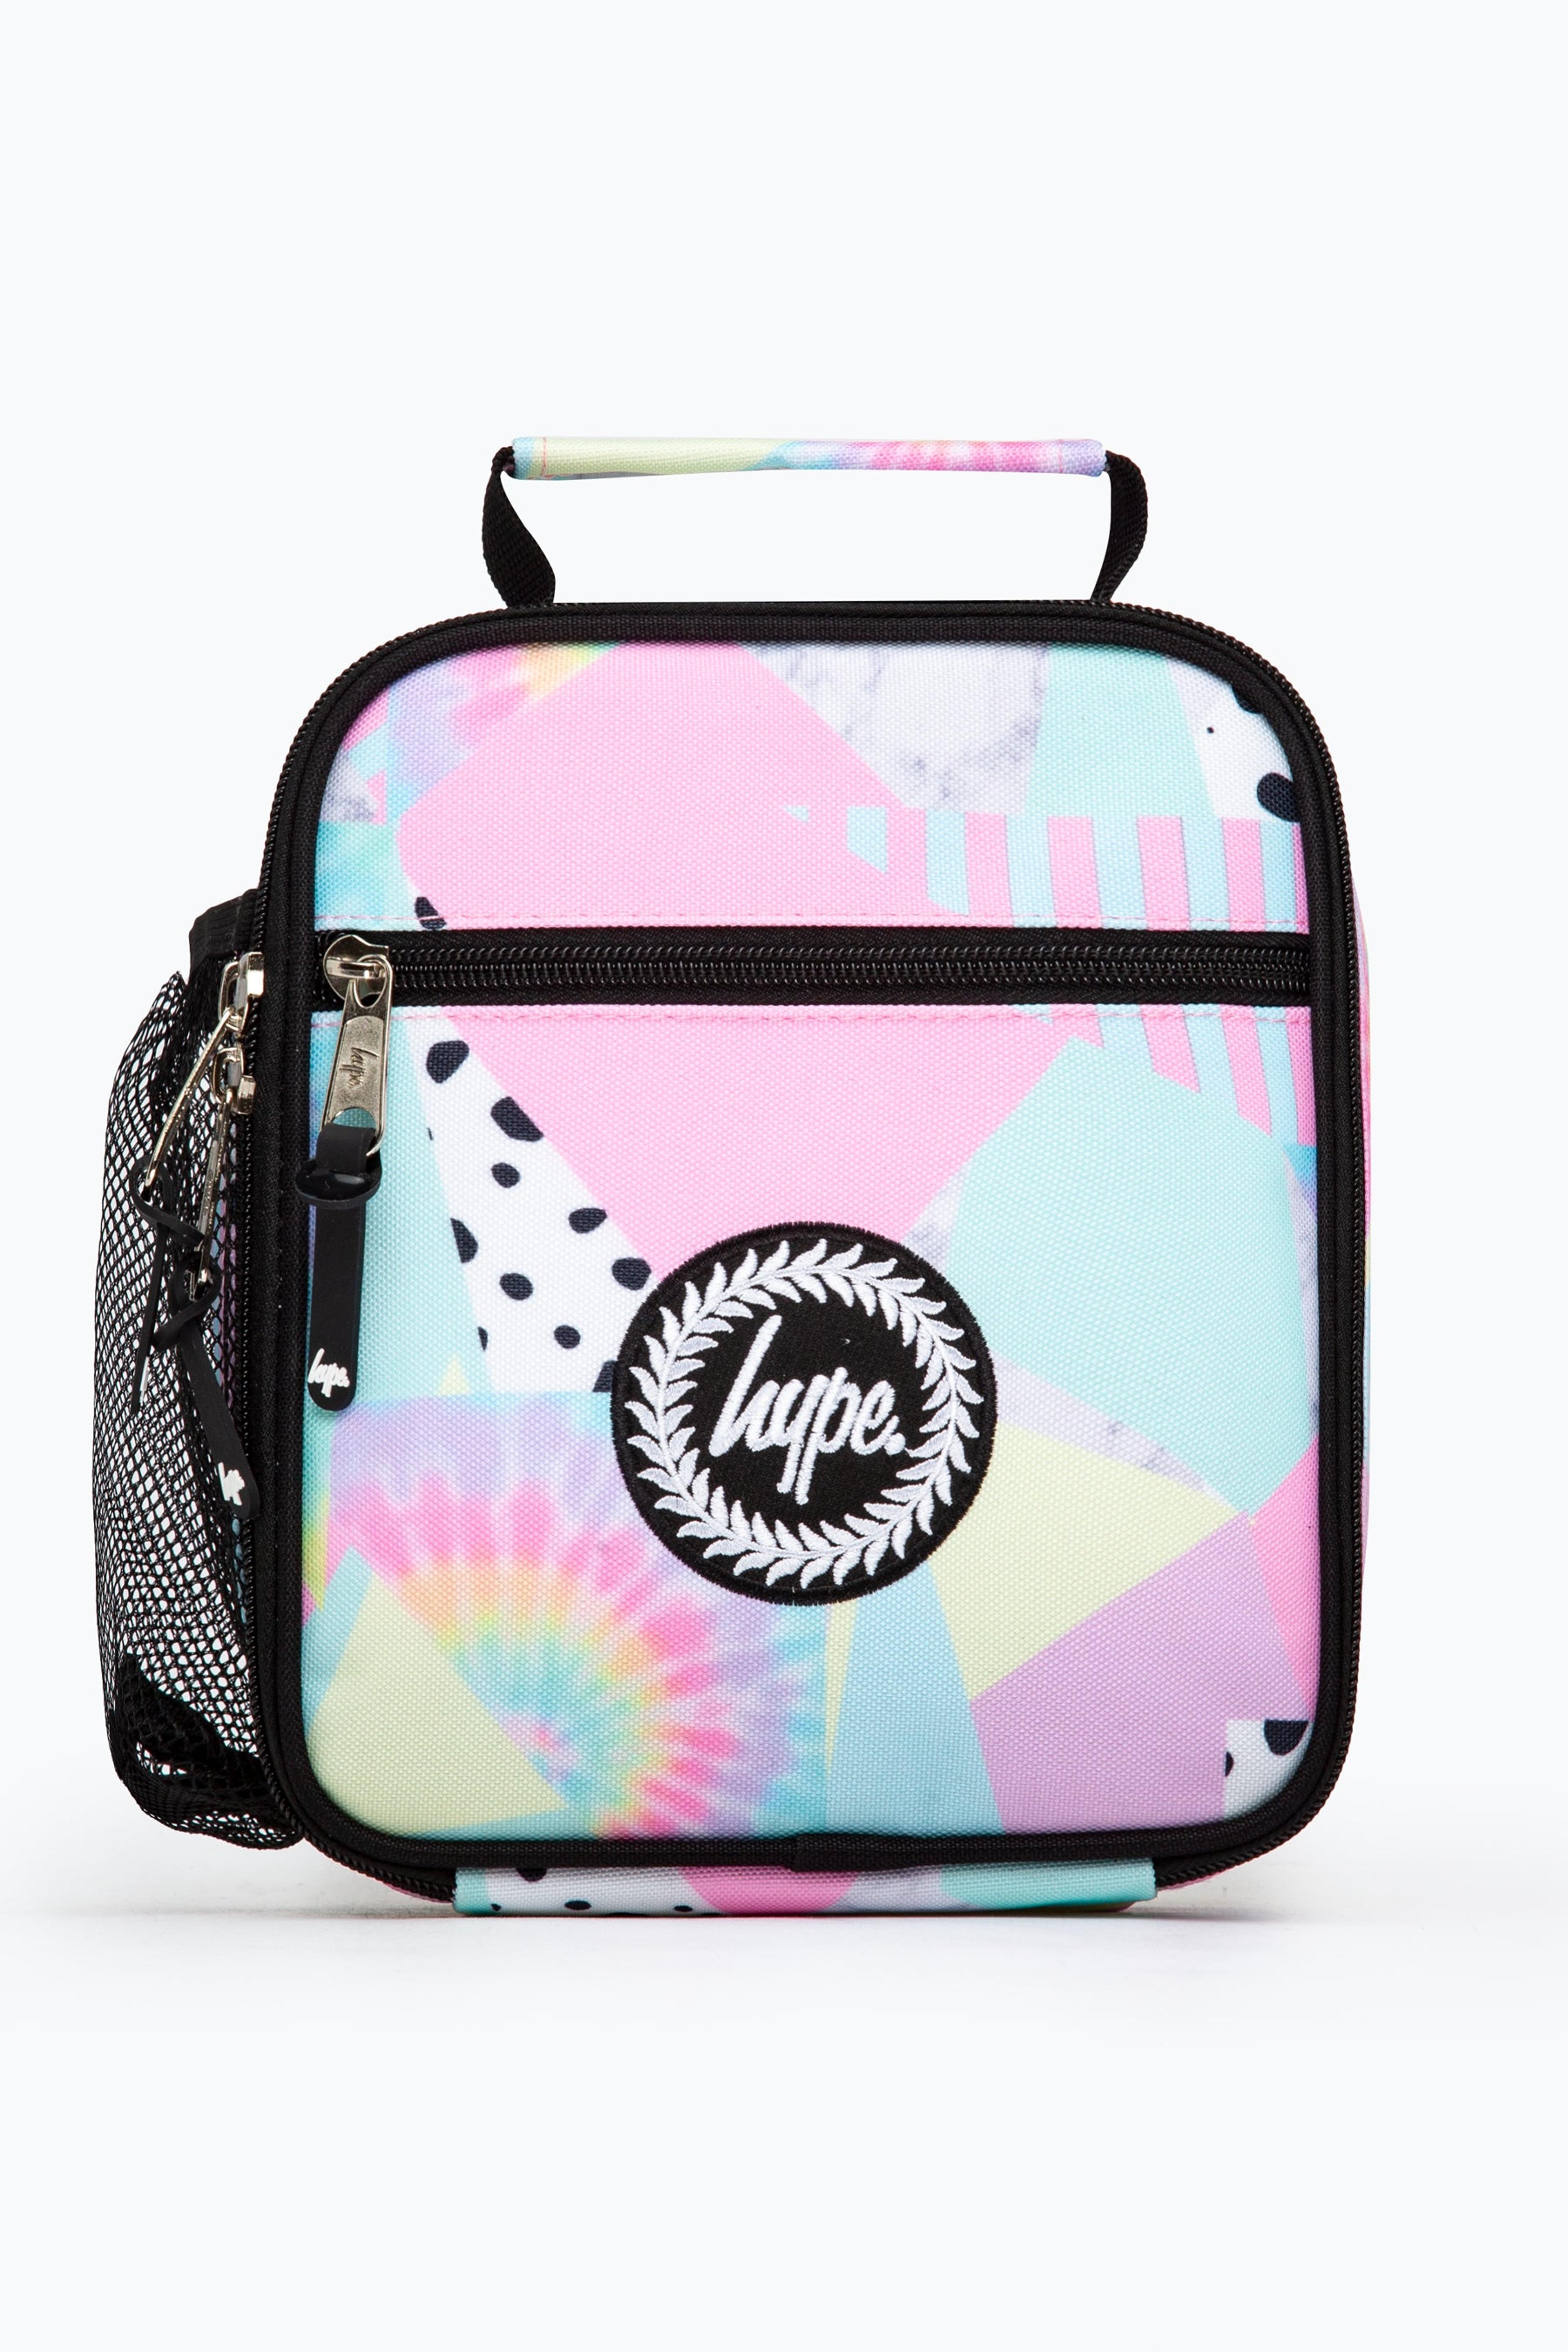 HYPE PASTEL COLLAGE LUNCHBOX